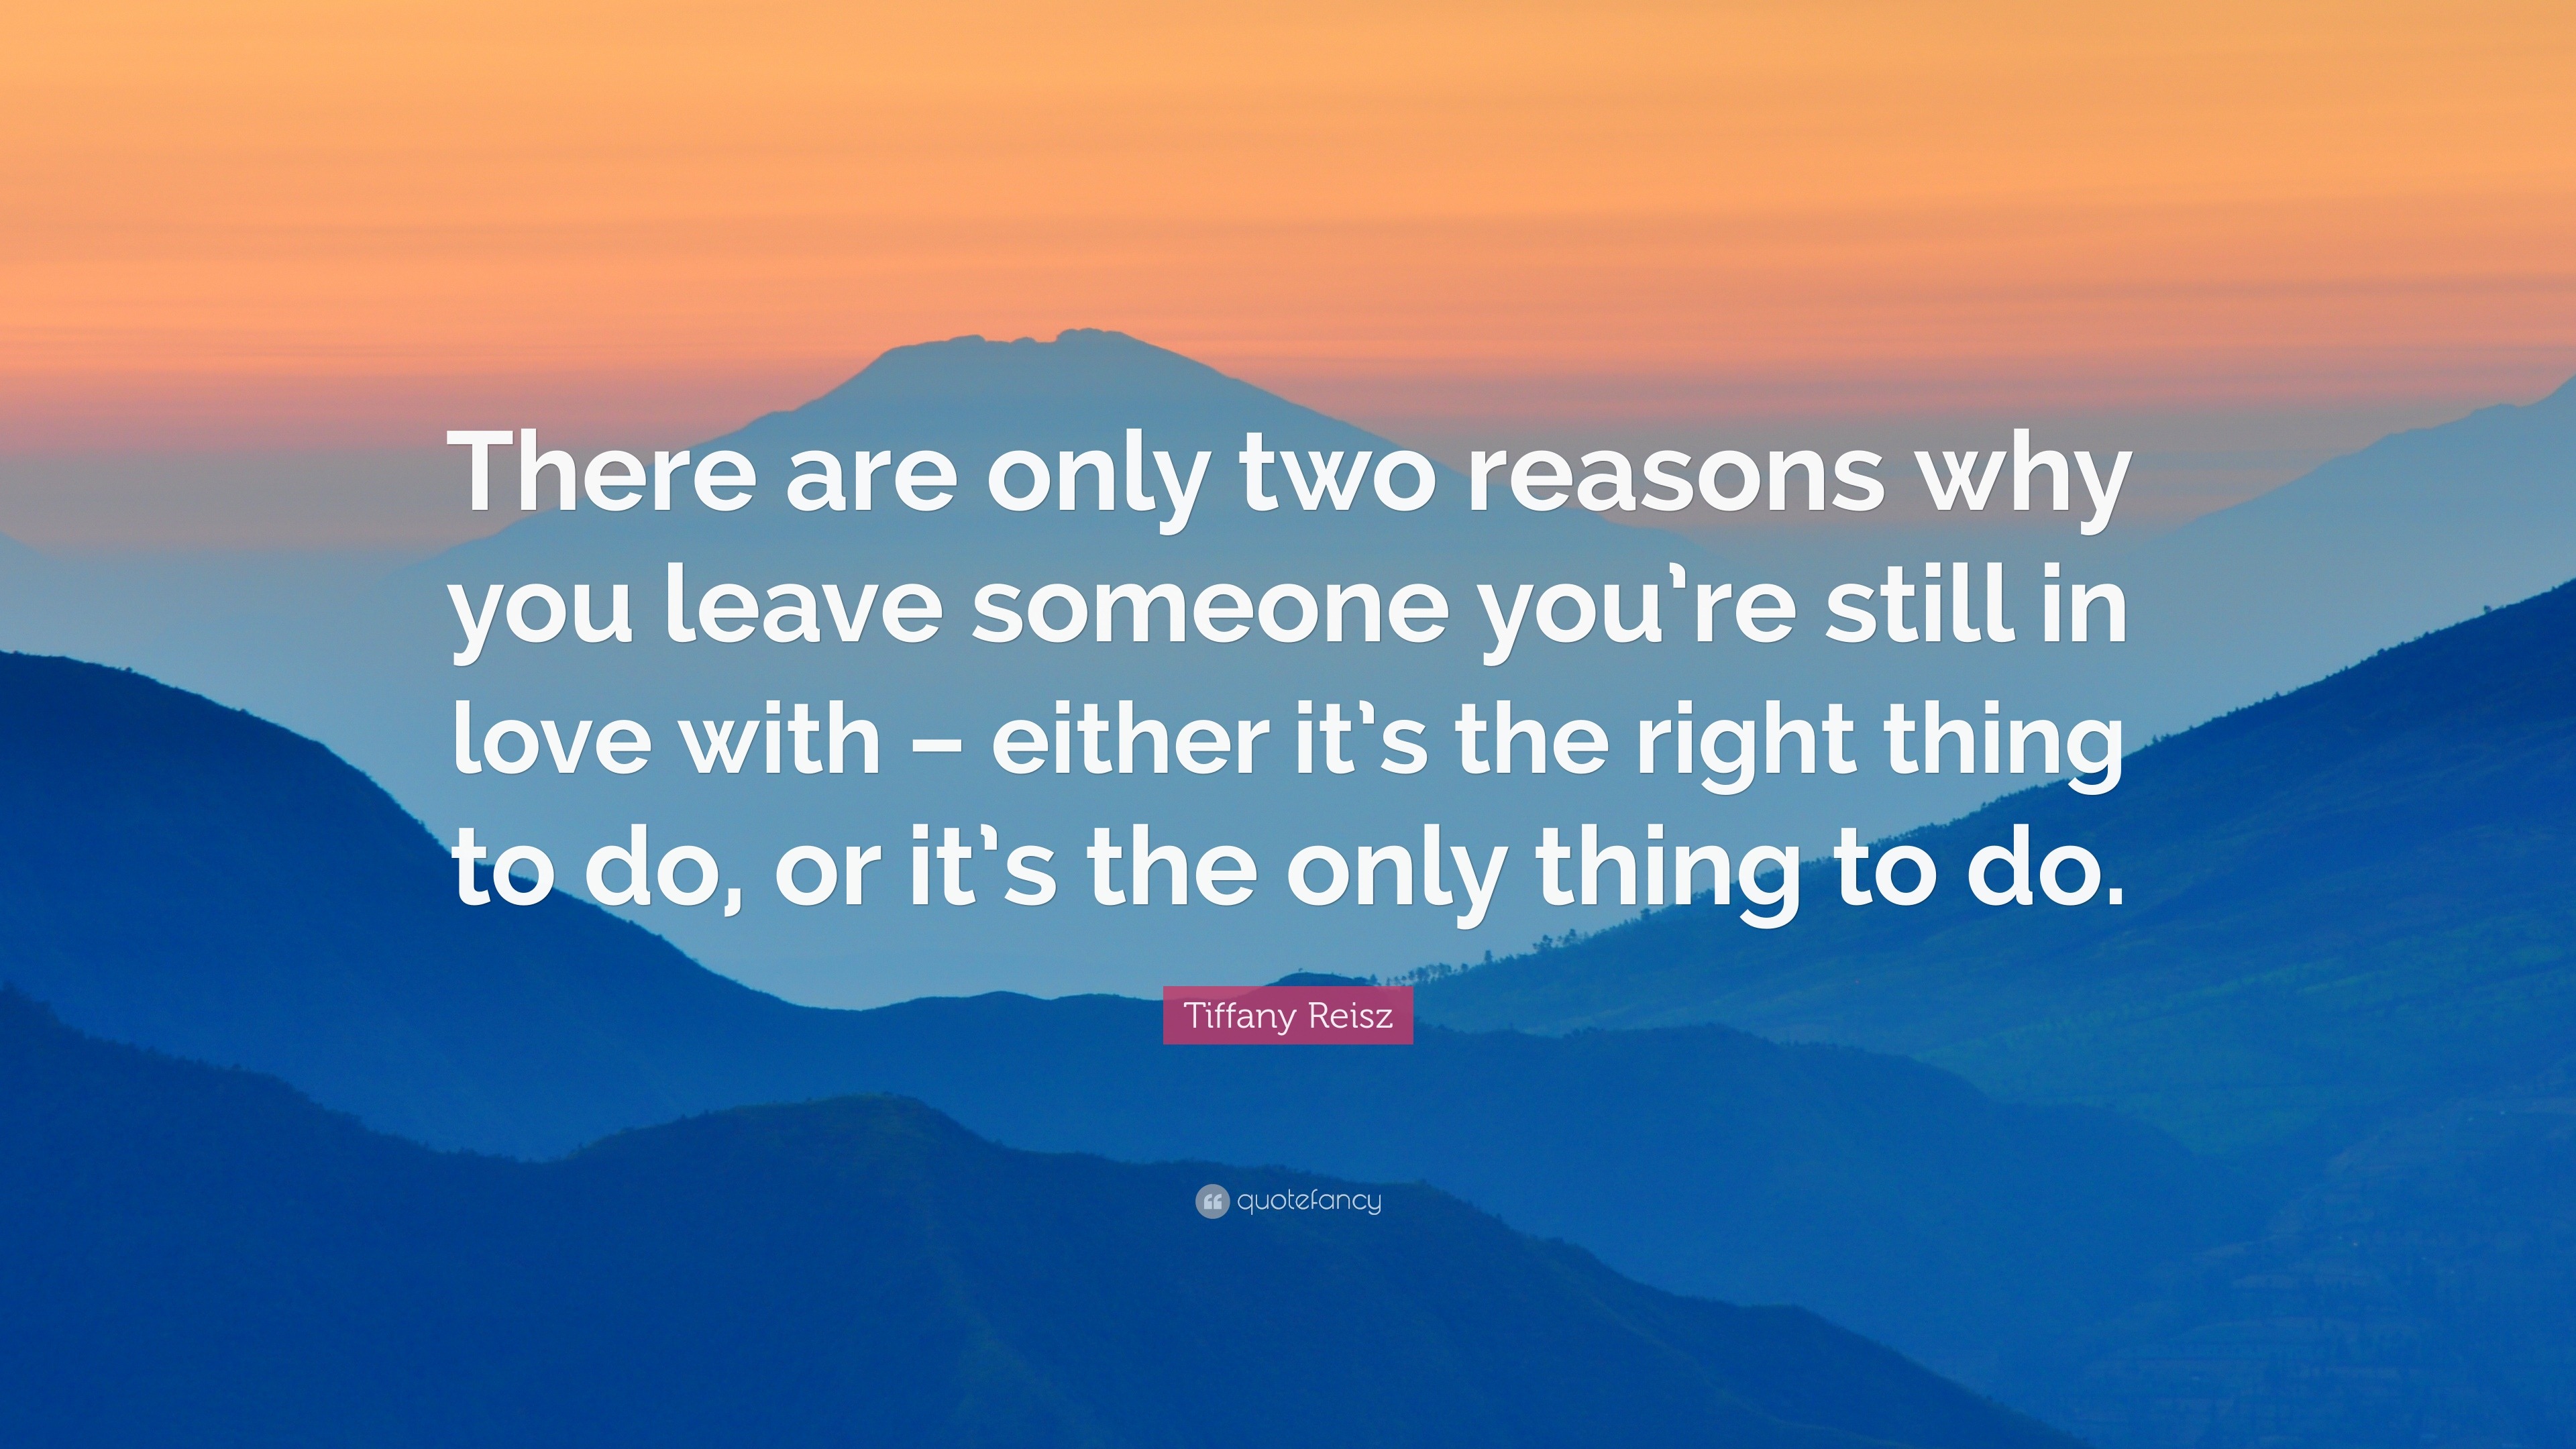 Tiffany Reisz Quote “There are only two reasons why you leave someone you